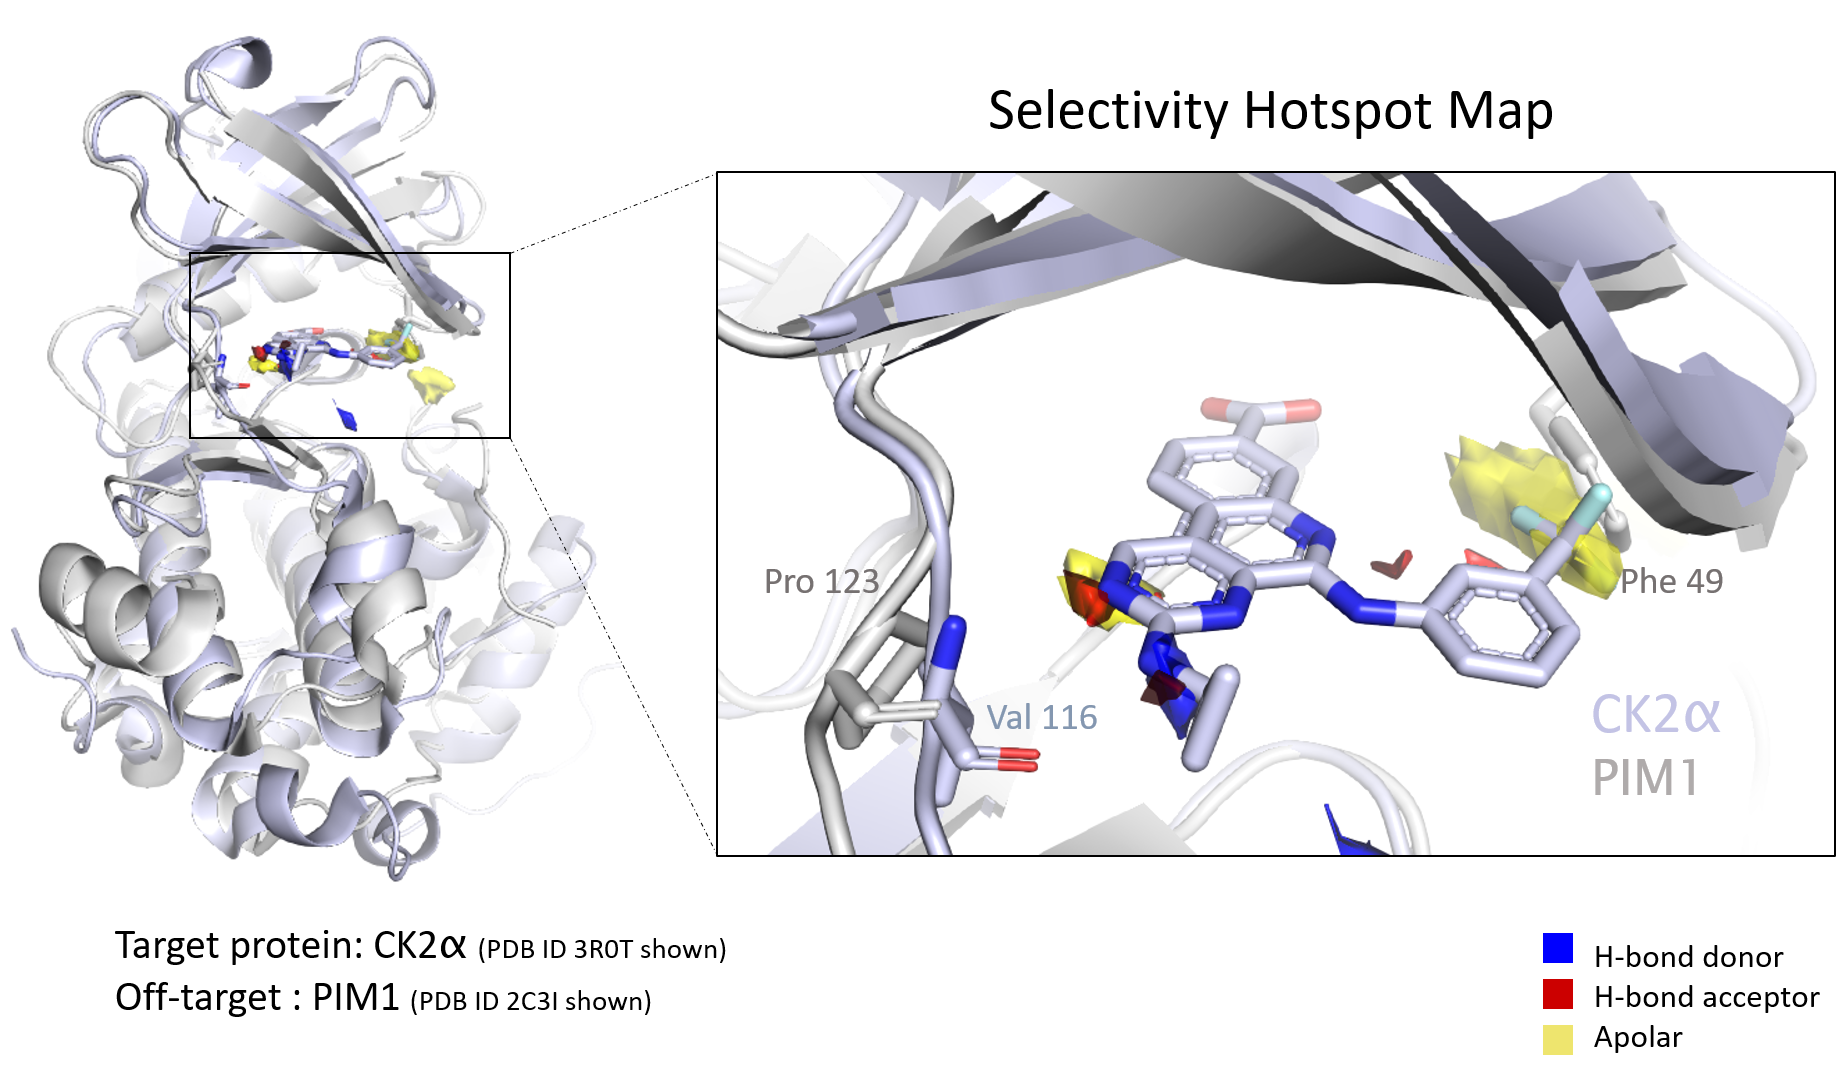 An example of ensemble hotspot mapping, which leverages fragment-based drug design.